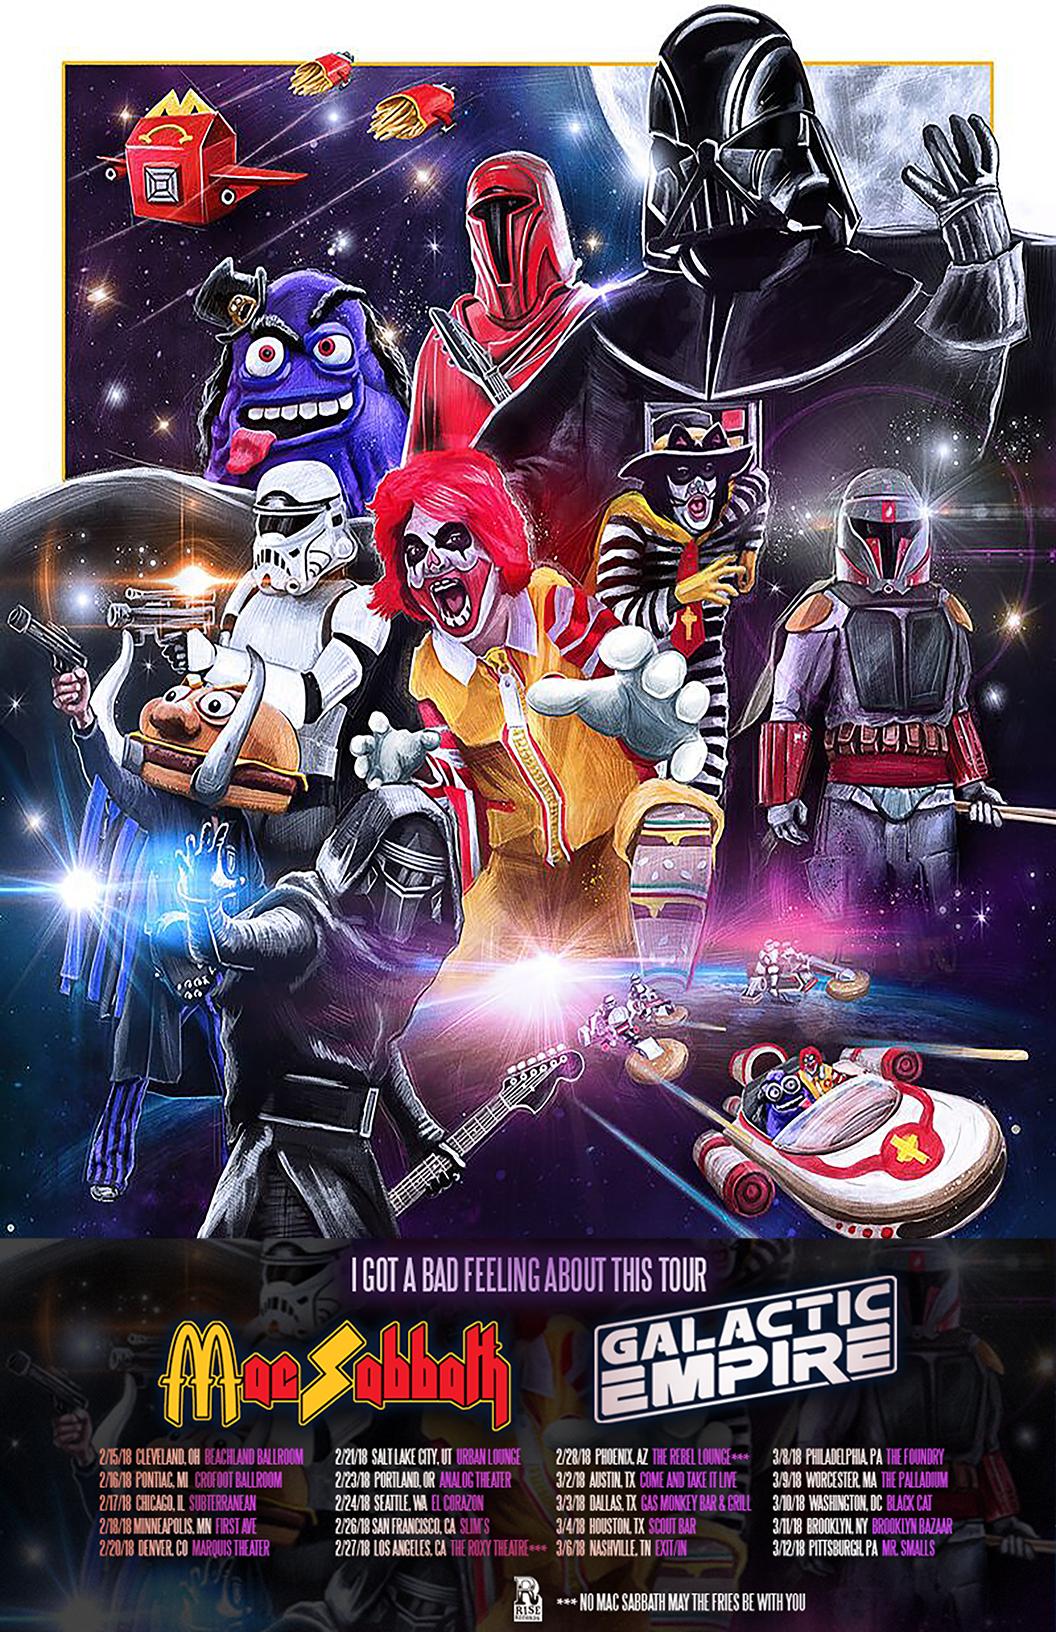 MAC SABBATH, GALACTIC EMPIRE & Little Furry Things @ The Analog Cafe and Theater